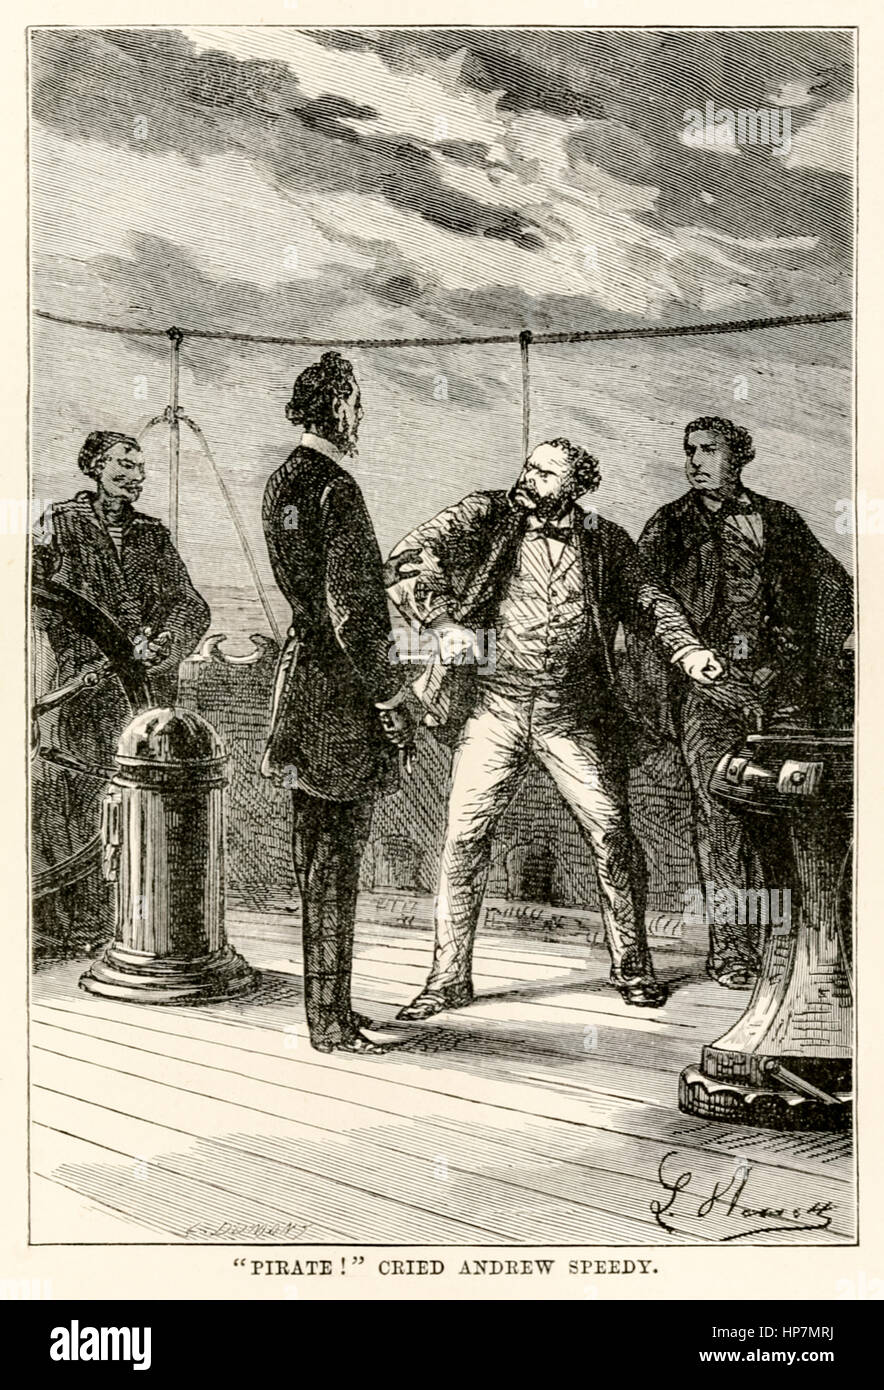 “”Pirate!” cried Andrew Speedy.” from ‘Around the World in Eighty Days’ by Jules Verne (1828-1905) published in 1873 illustration by Léon Benett (1839-1917) and engraving by Louis Dumont (born 1822). Stock Photo